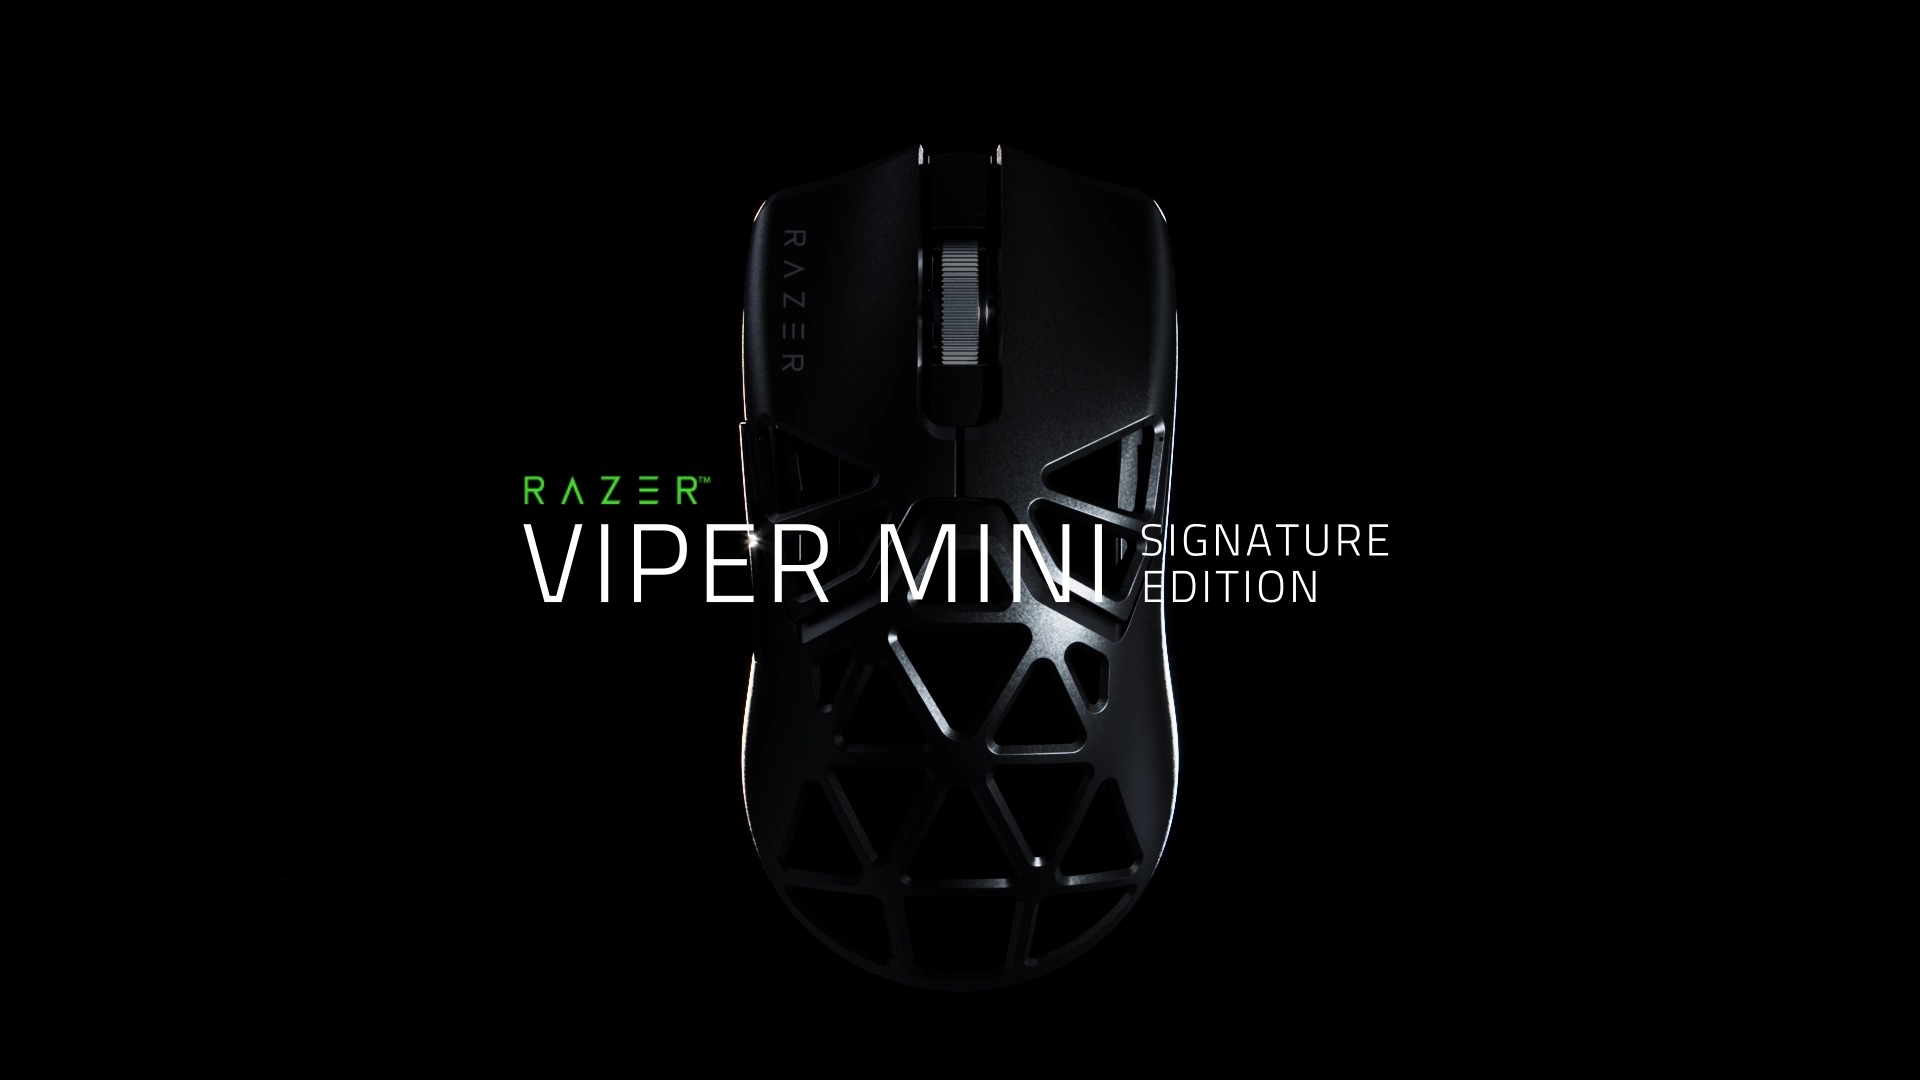 R Λ Z Ξ R on X: Meet the Razer Viper Mini Signature Edition: the best  hyper-lightweight performance gaming mouse. Crafted from high-grade  magnesium alloy, arm yourself with a masterpiece that outclasses